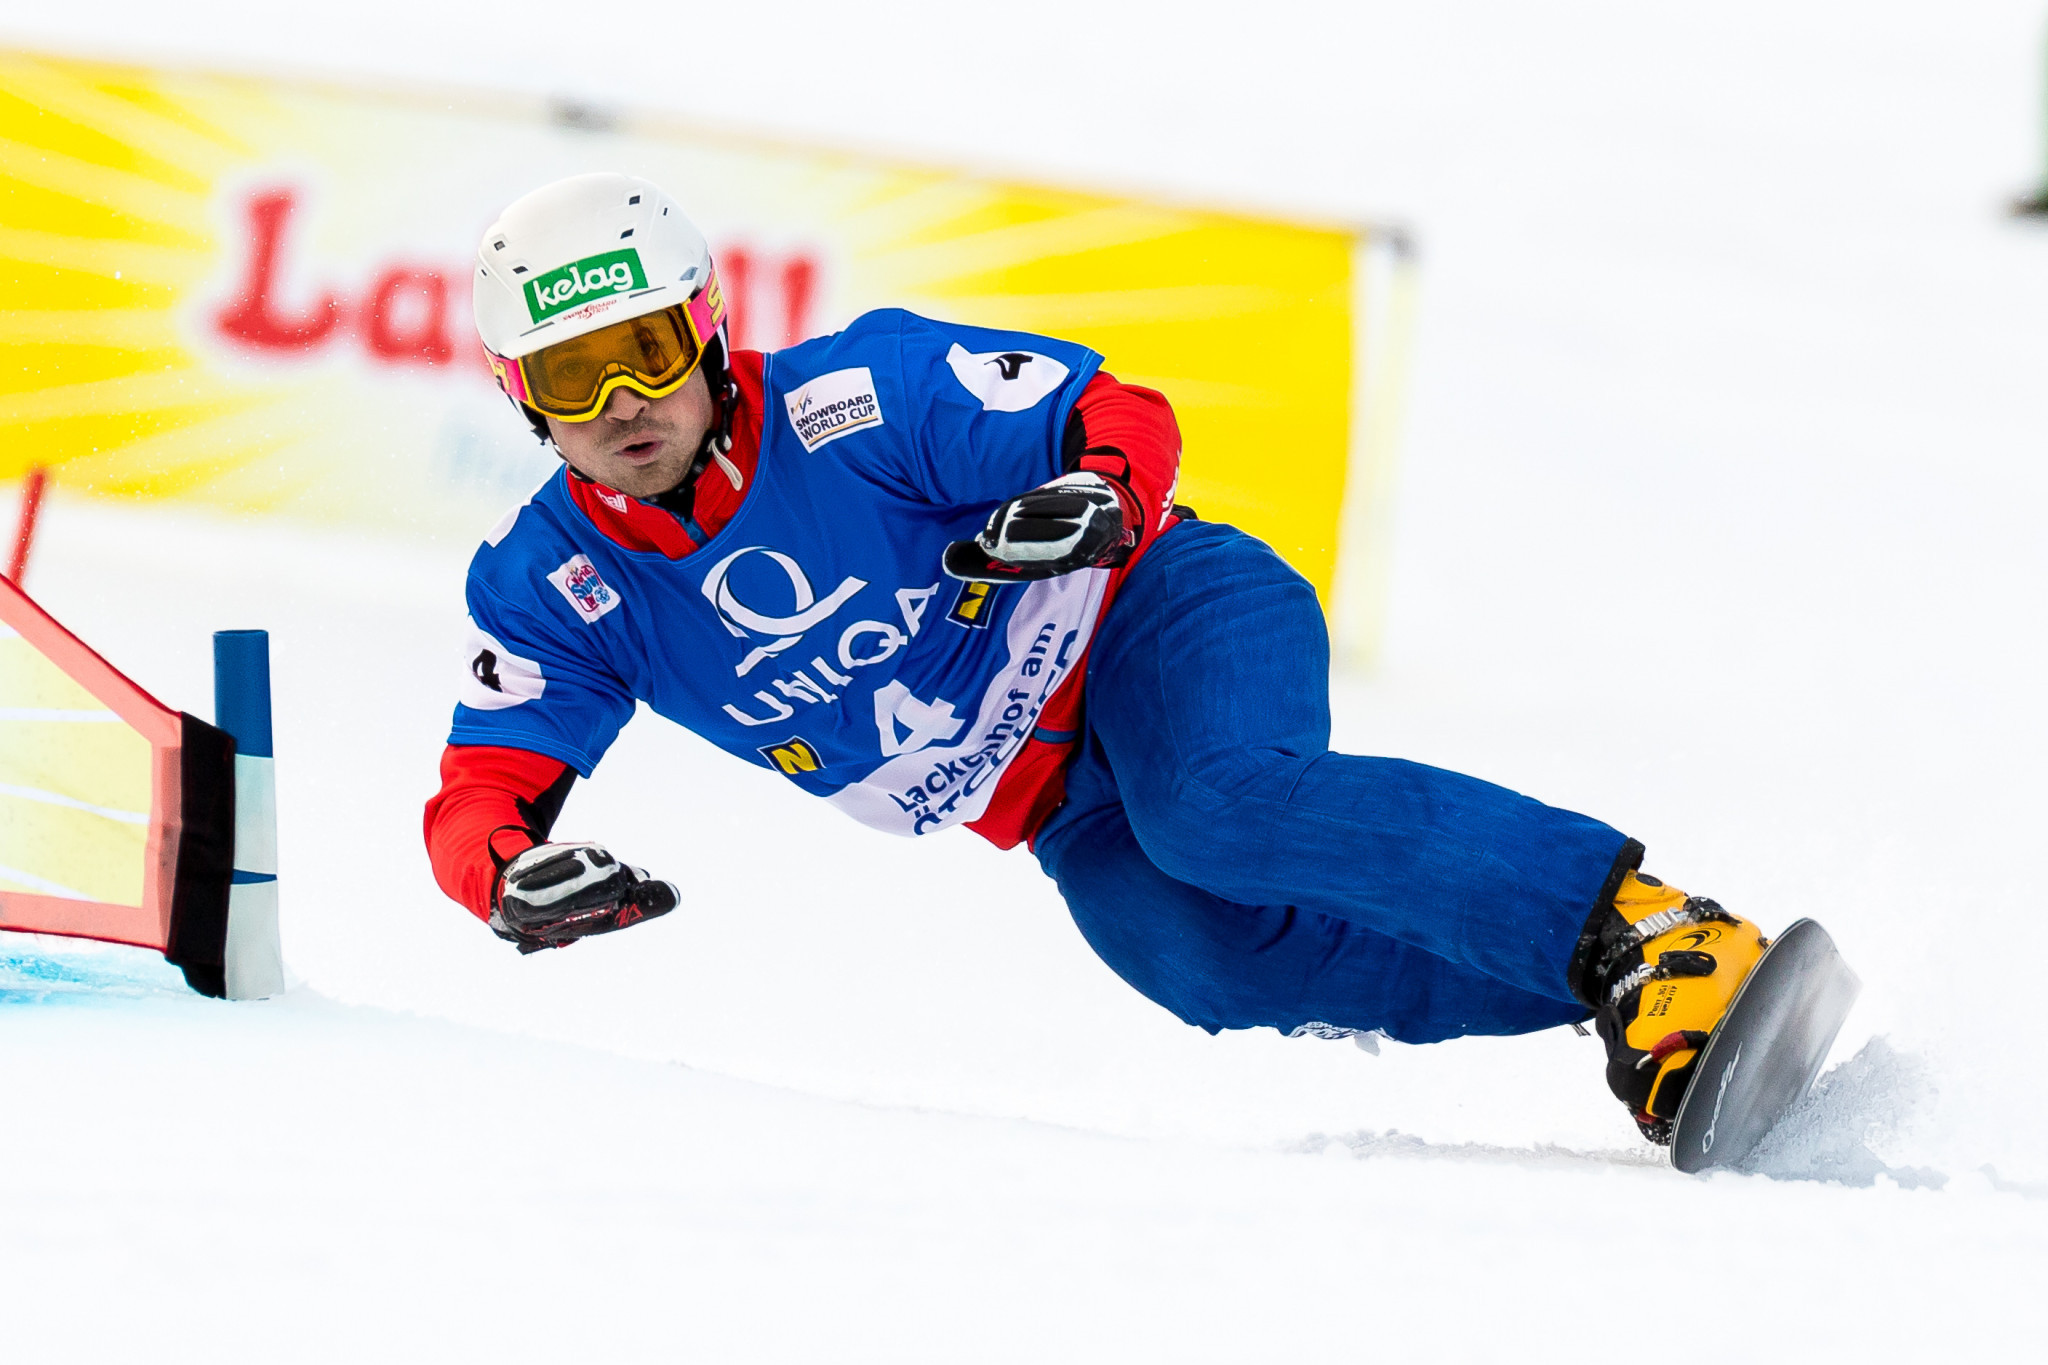 Snowboard duo Payer and Schoeffmann win parallel slalom team event at Bad Gastein